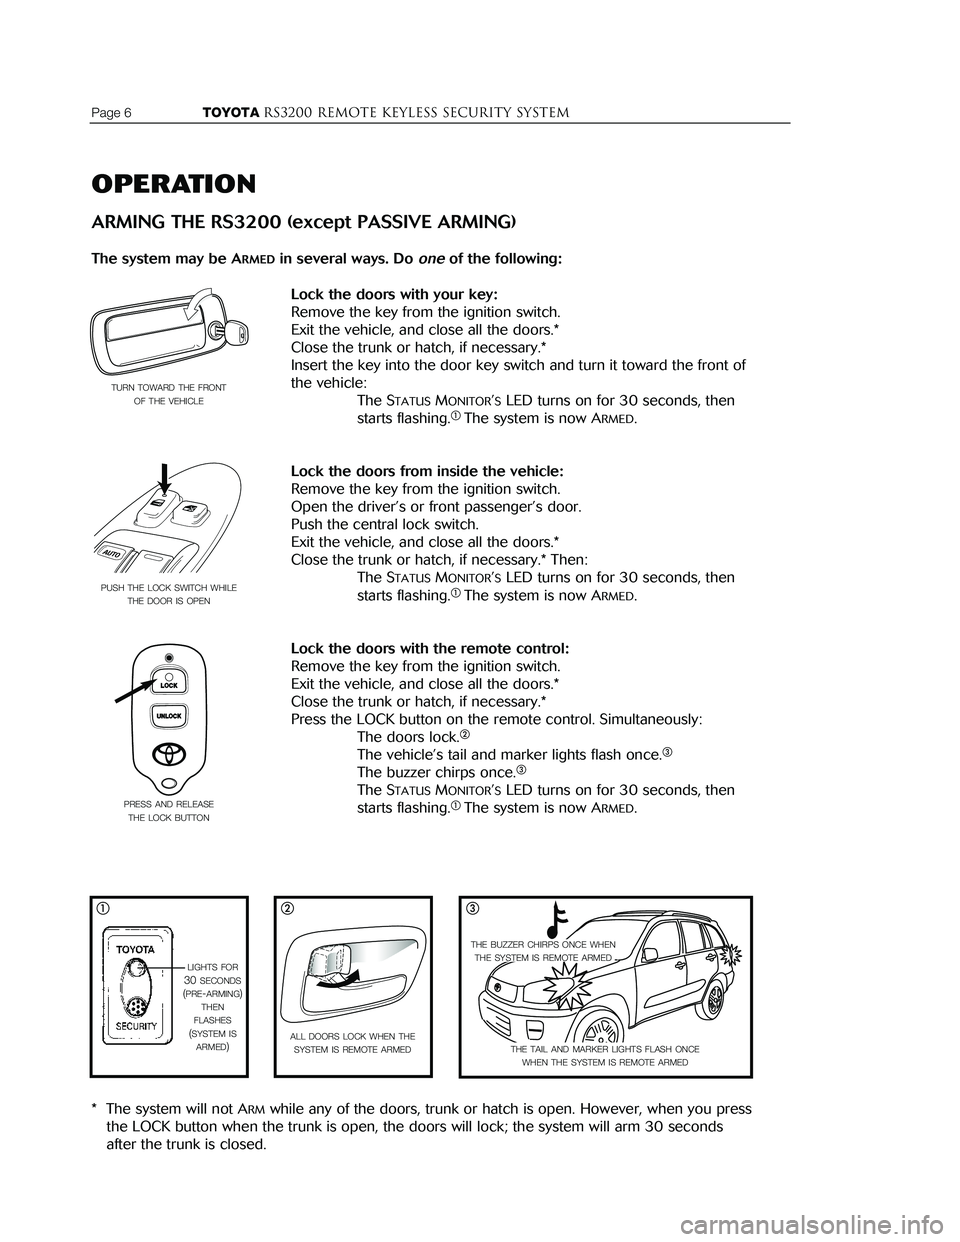 TOYOTA ECHO 2001  Accessories, Audio & Navigation (in English) Page 6                  TOYOTARS3200 REMOTE KEYLESS Security systemTOYOTARS3200 remote keyless Security systemPage 15
OPERATION
ARMING THE RS3200 (except PASSIVE ARMING)
The system may be ARMEDin seve